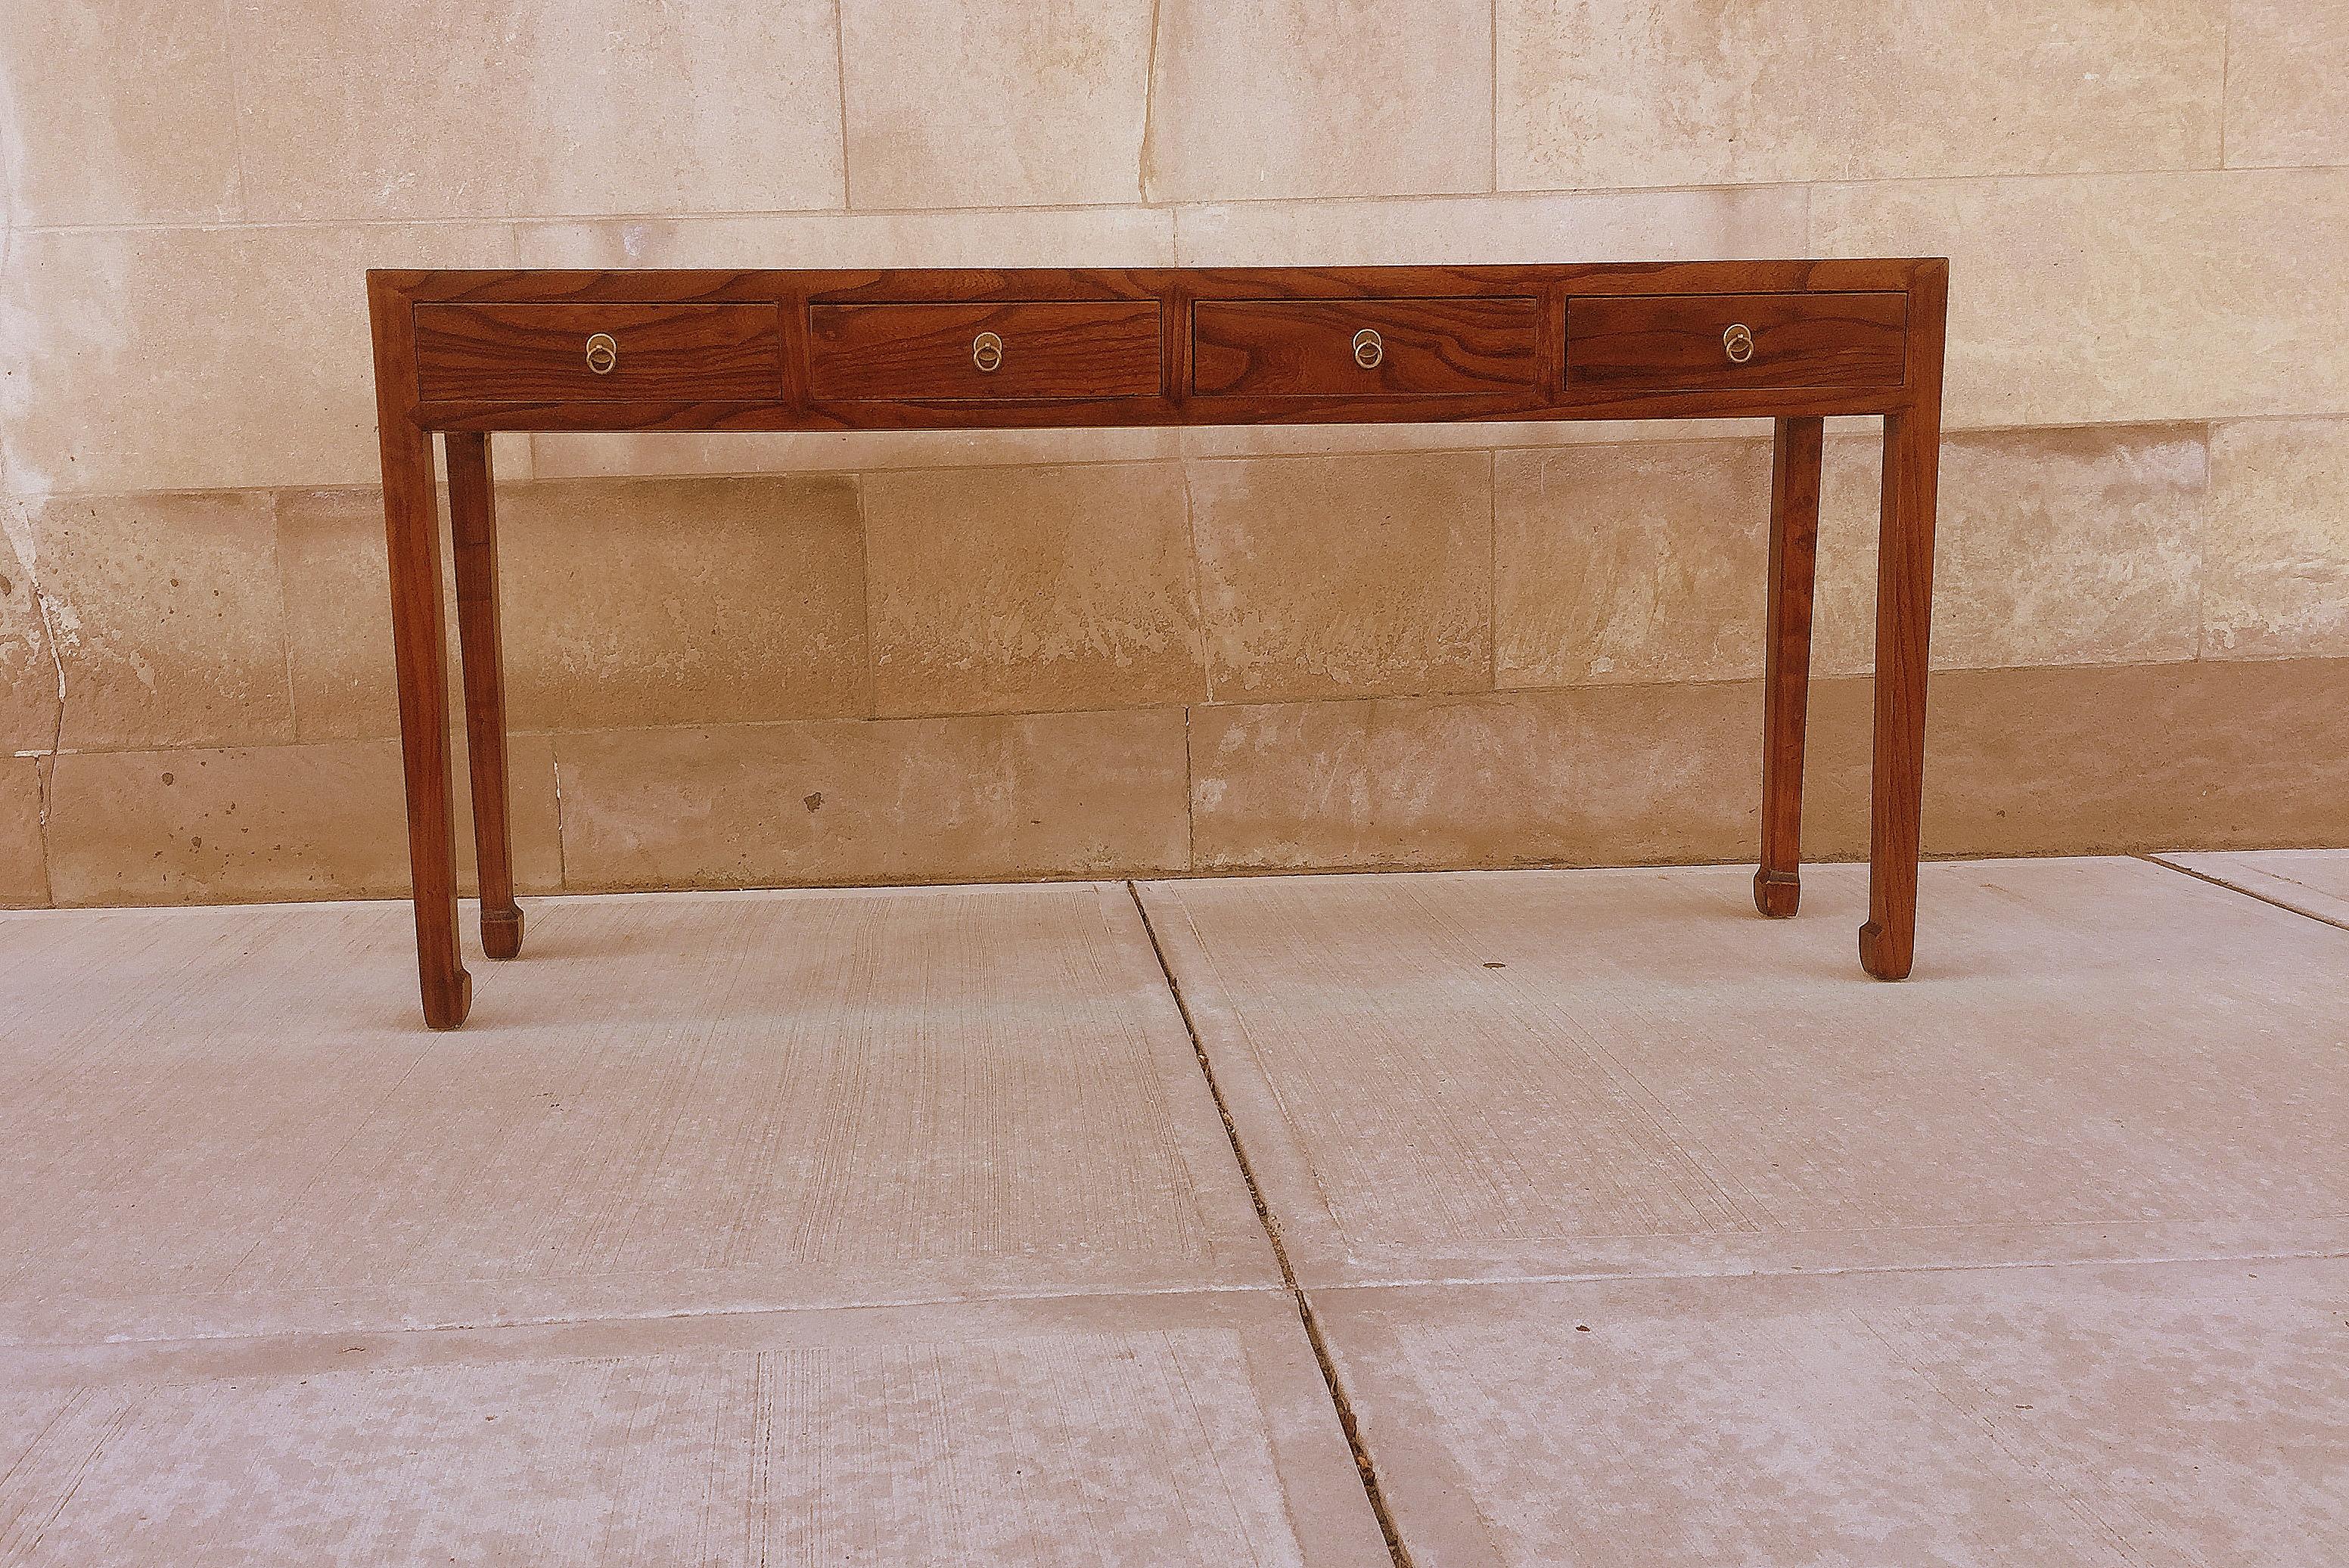 Wood Fine Jumu Console Table with Drawers